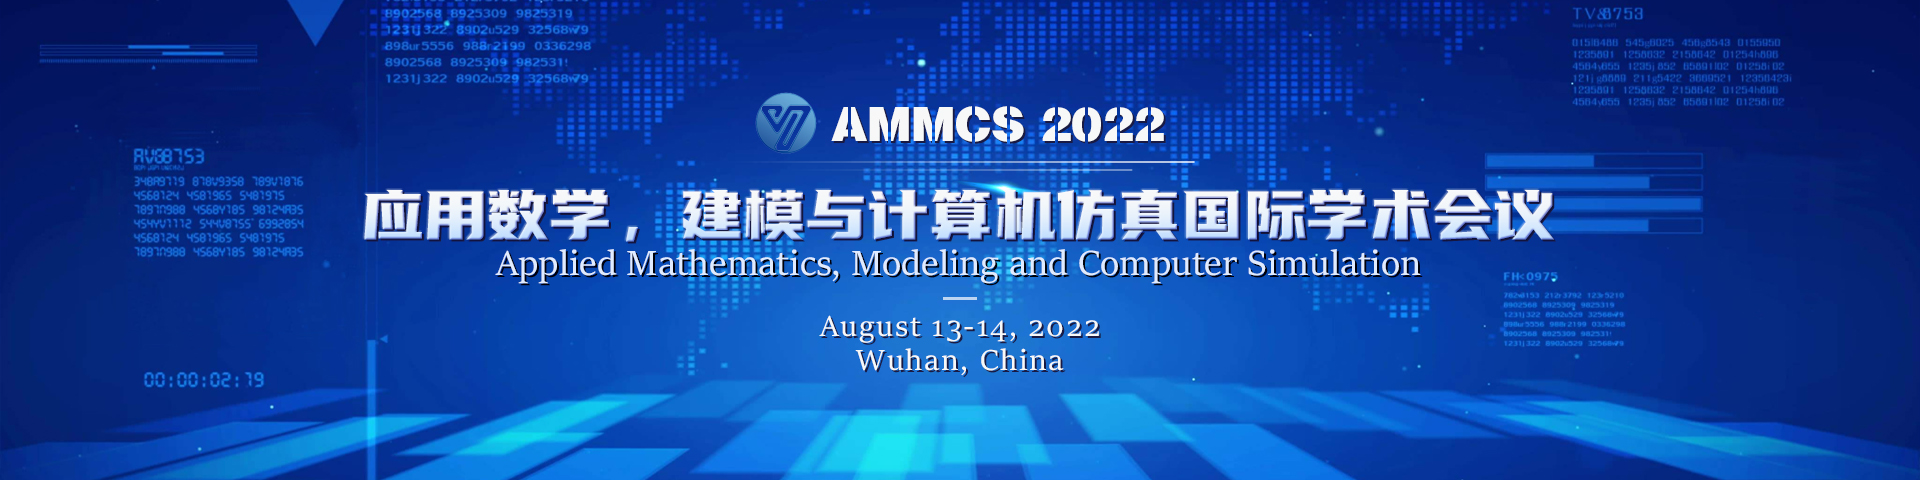 Welcome to AMMCS 2022